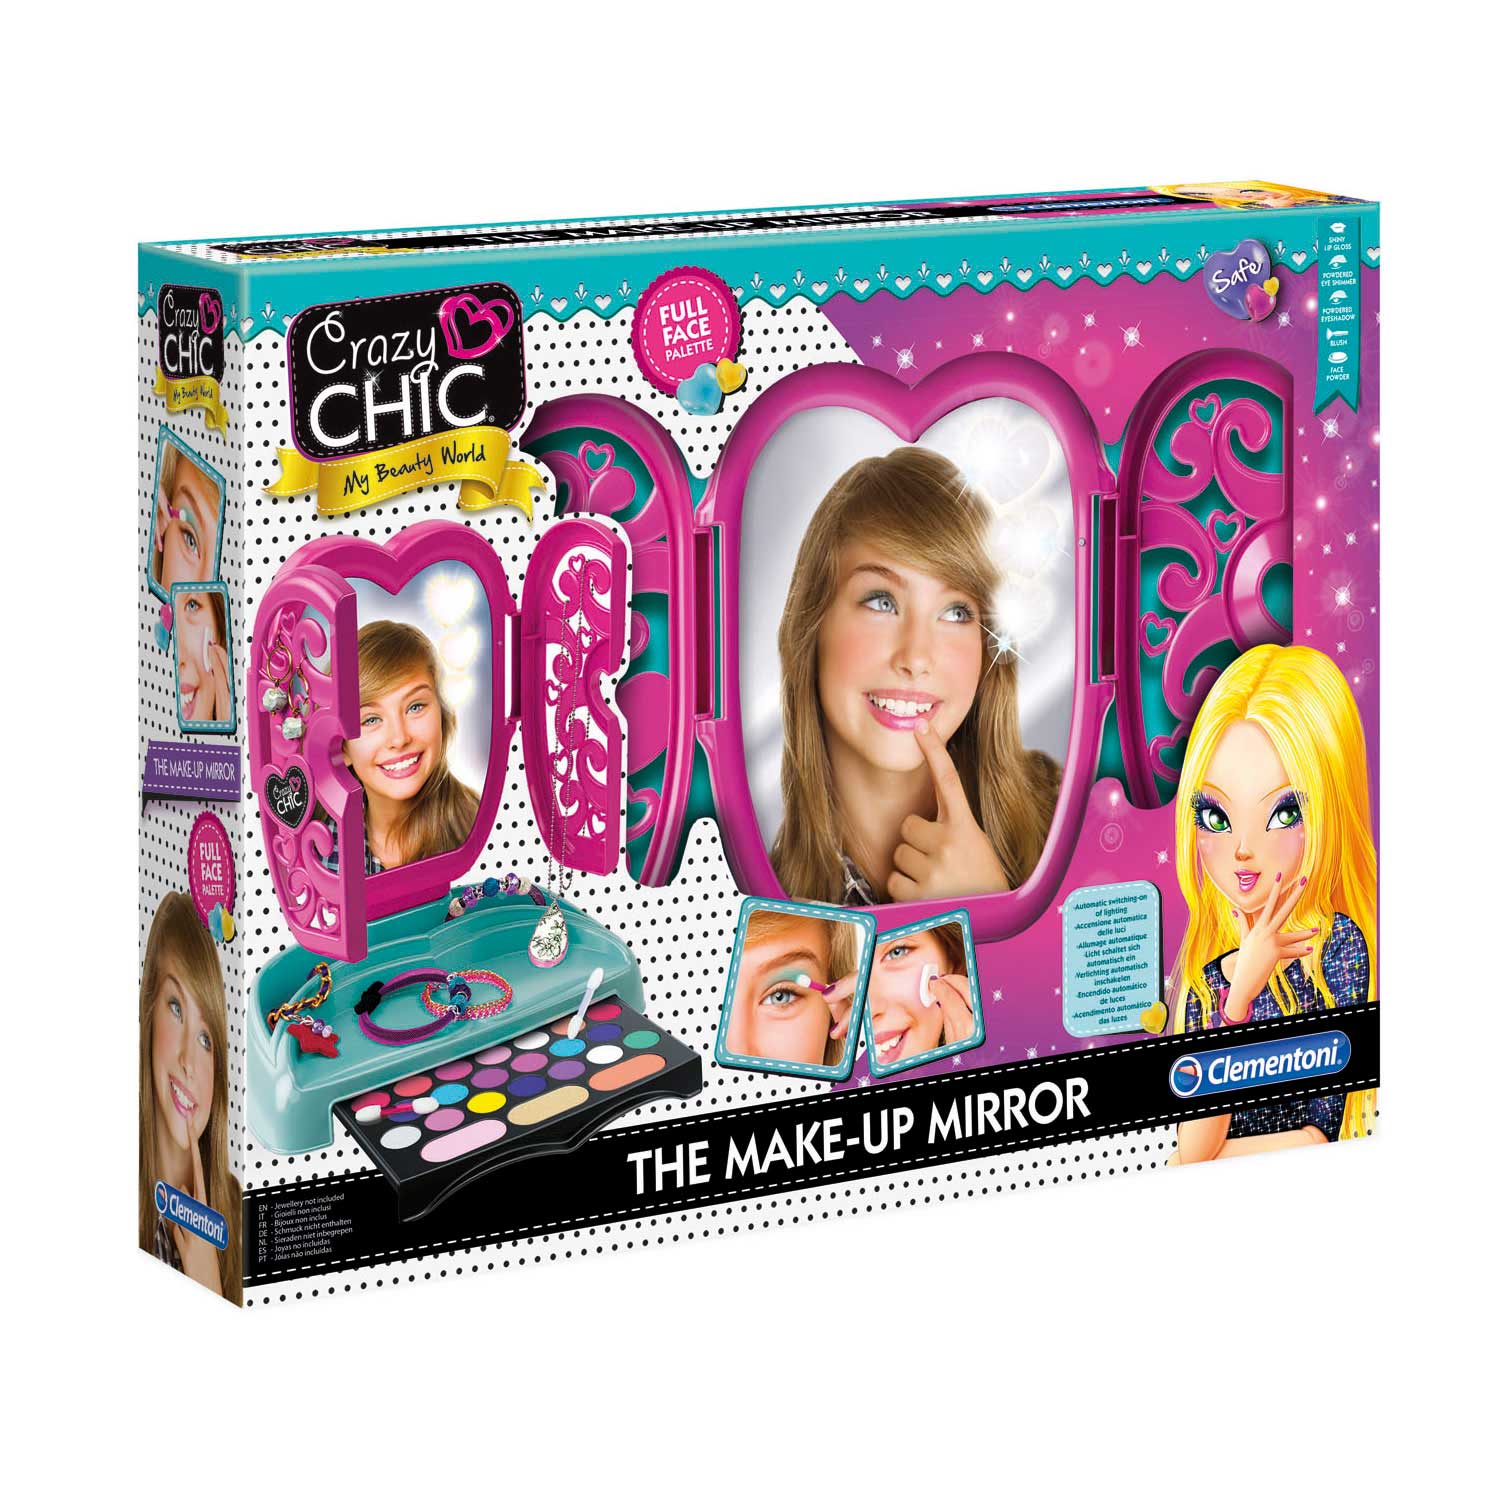 Clementoni Crazy Chic Make-up - The Make-up Mirror